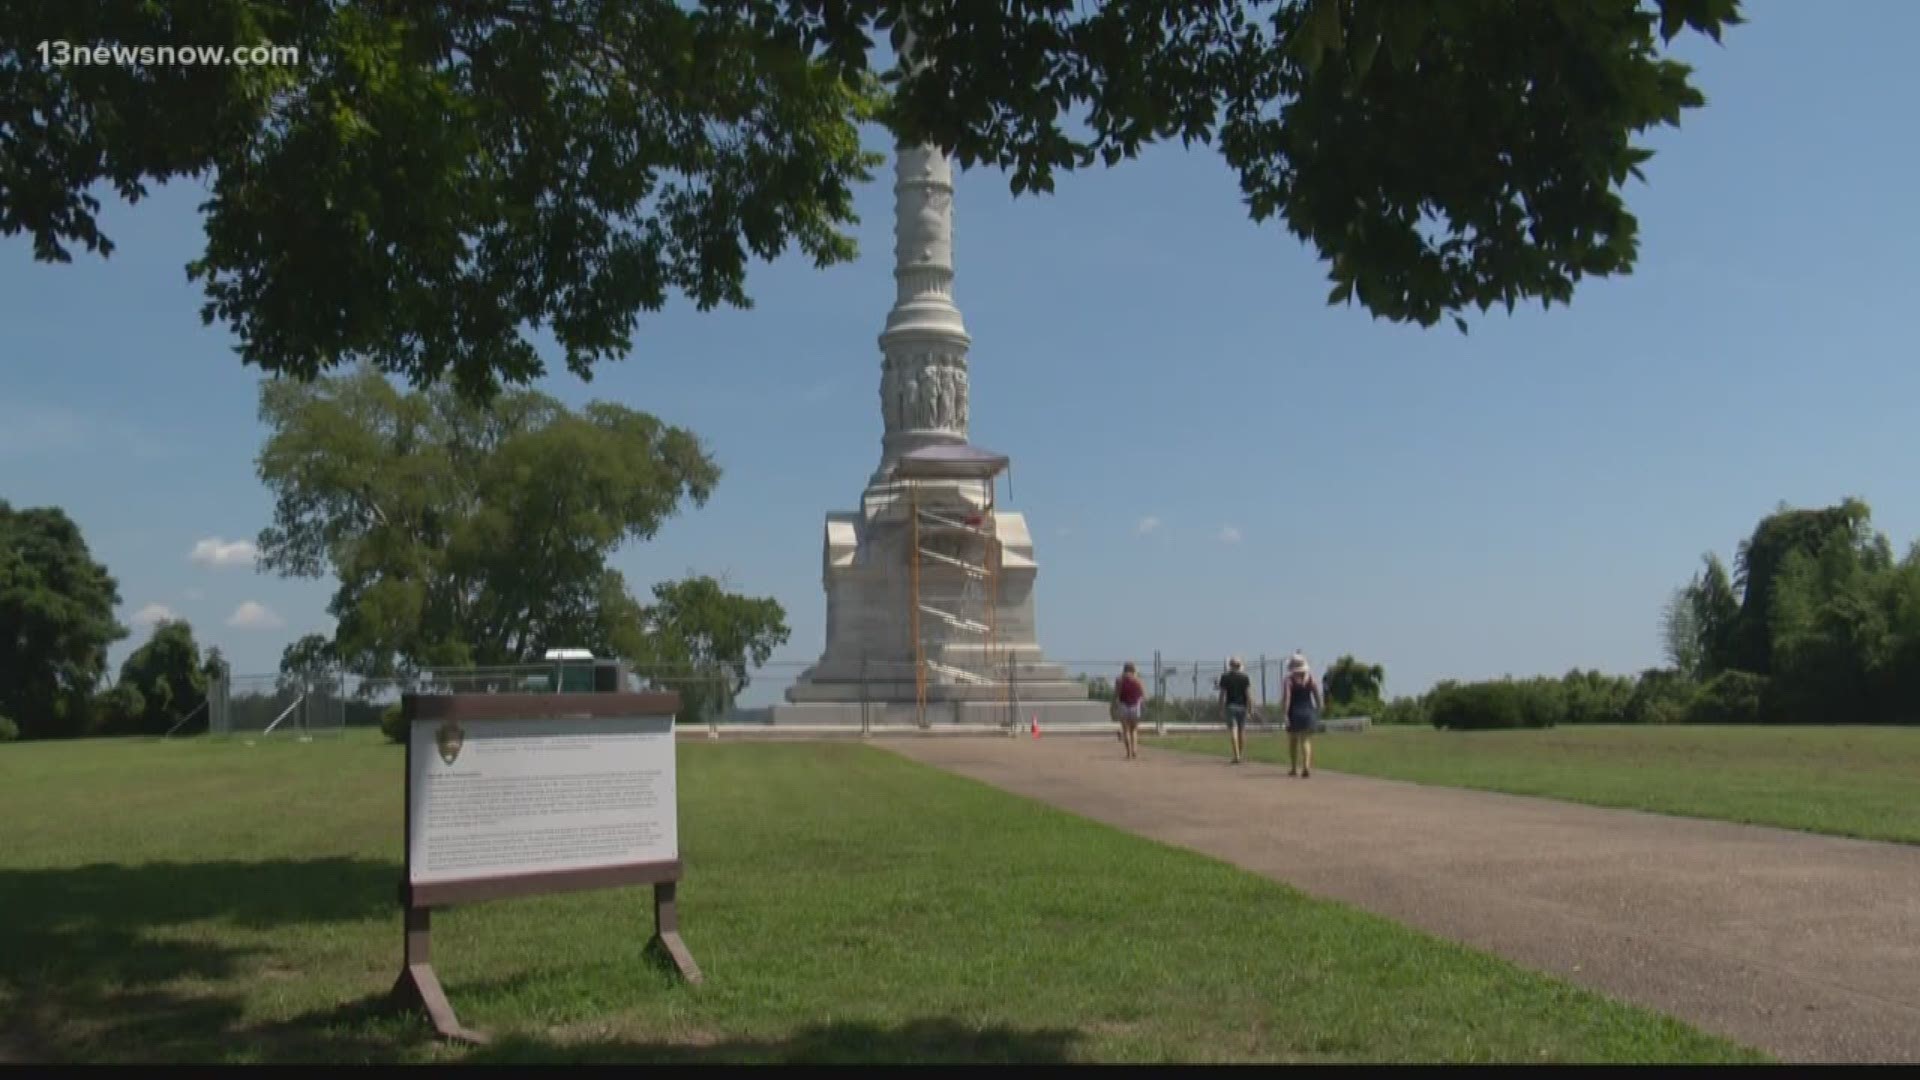 Severe weather is causing uncertainty for the future of a Revolutionary War monument.